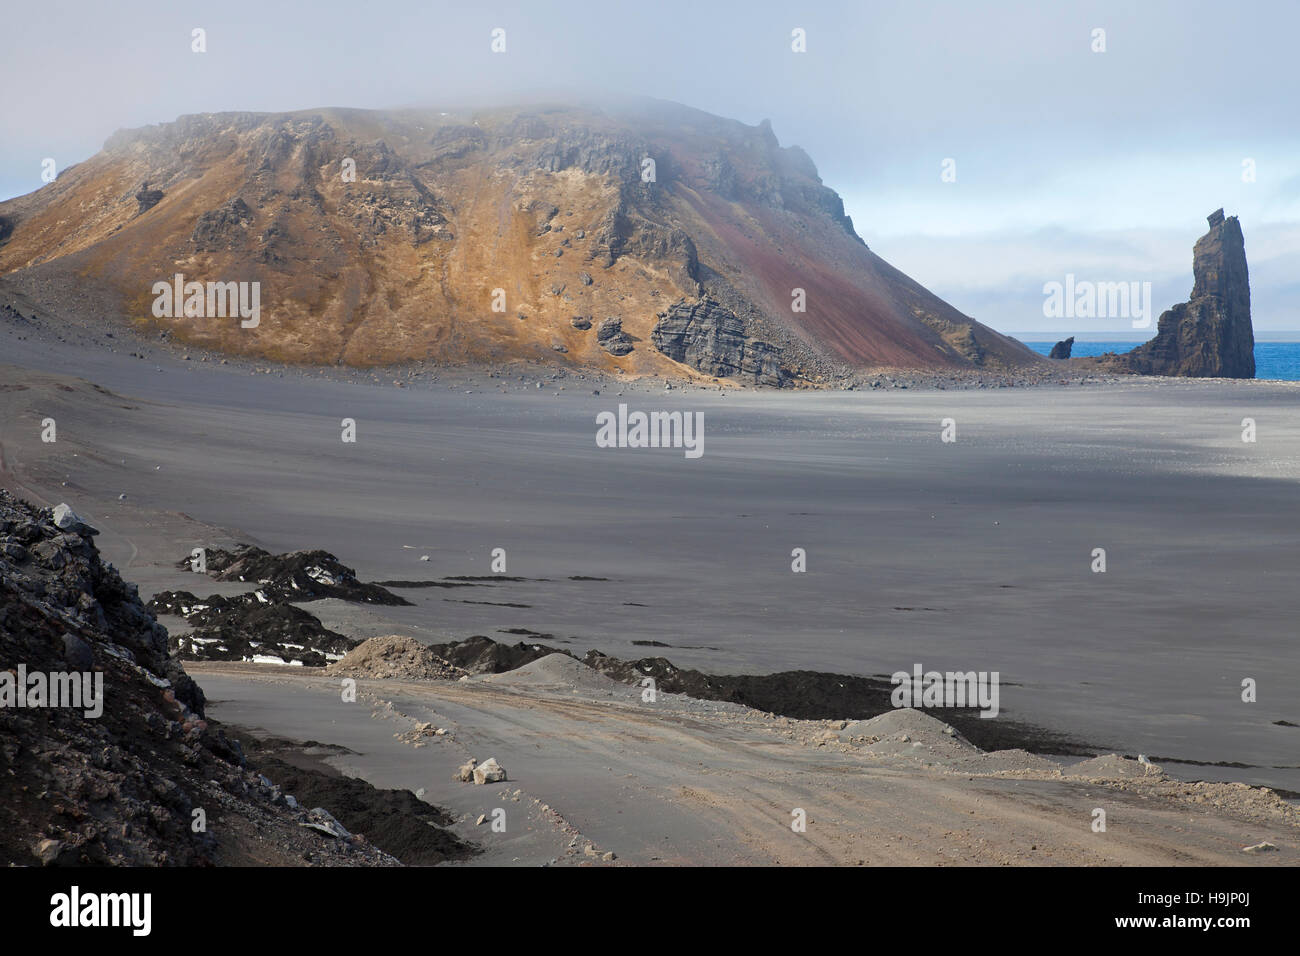 Rhyolite mountain and volcanic plug / volcanic neck / lava neck on beach of Jan Mayen, island in the Arctic Ocean in spring Stock Photo